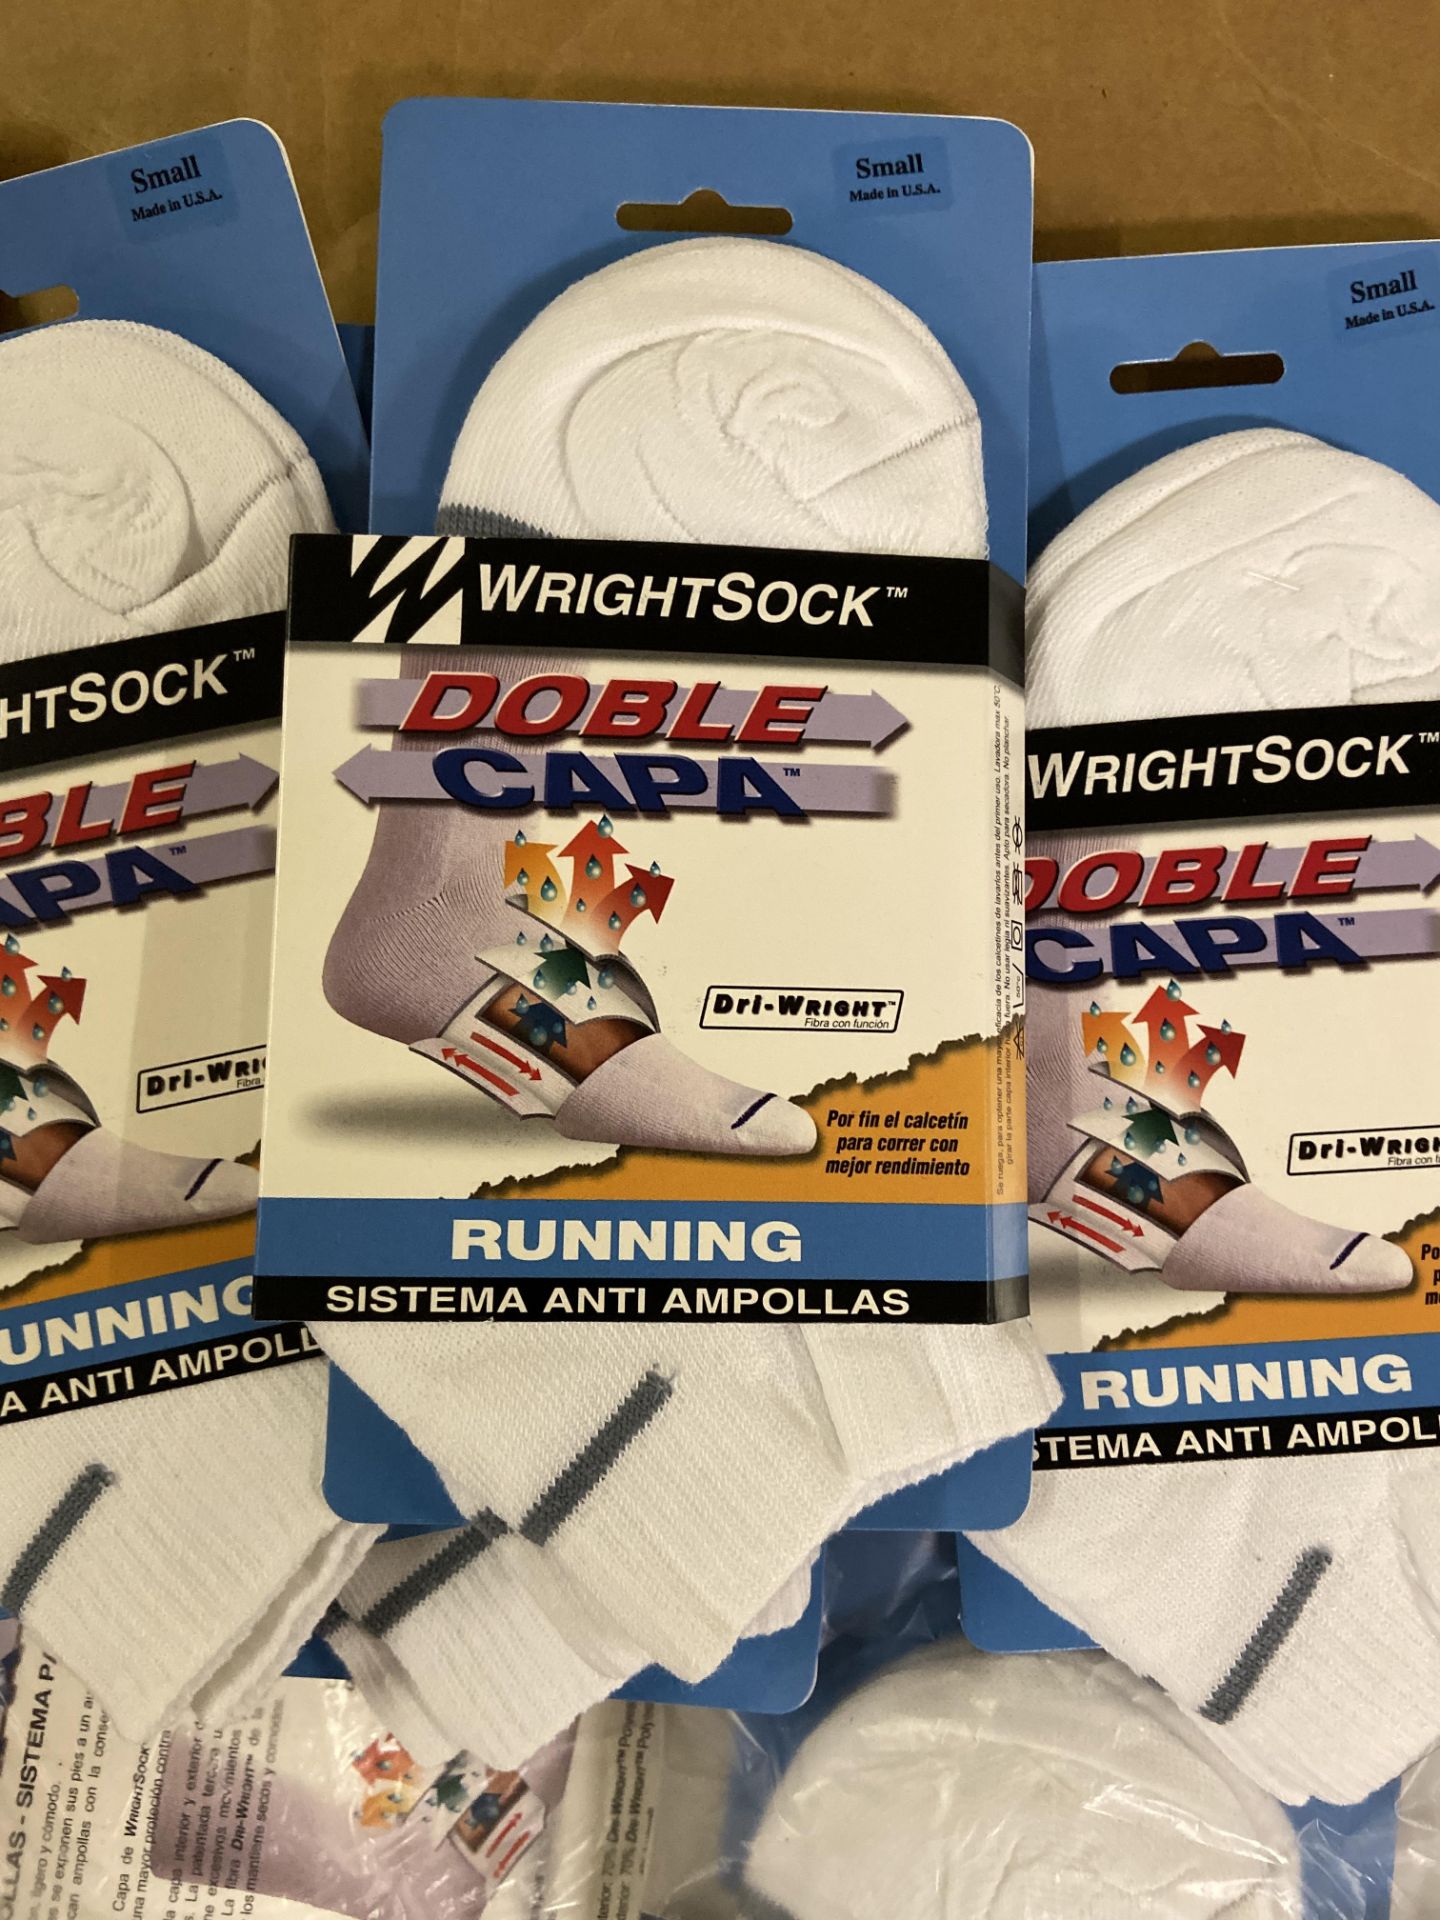 500+ packs of New Socks, Wrightsock Running and Coolmesh, Double Layer, White w. Various Stripes - Image 6 of 7